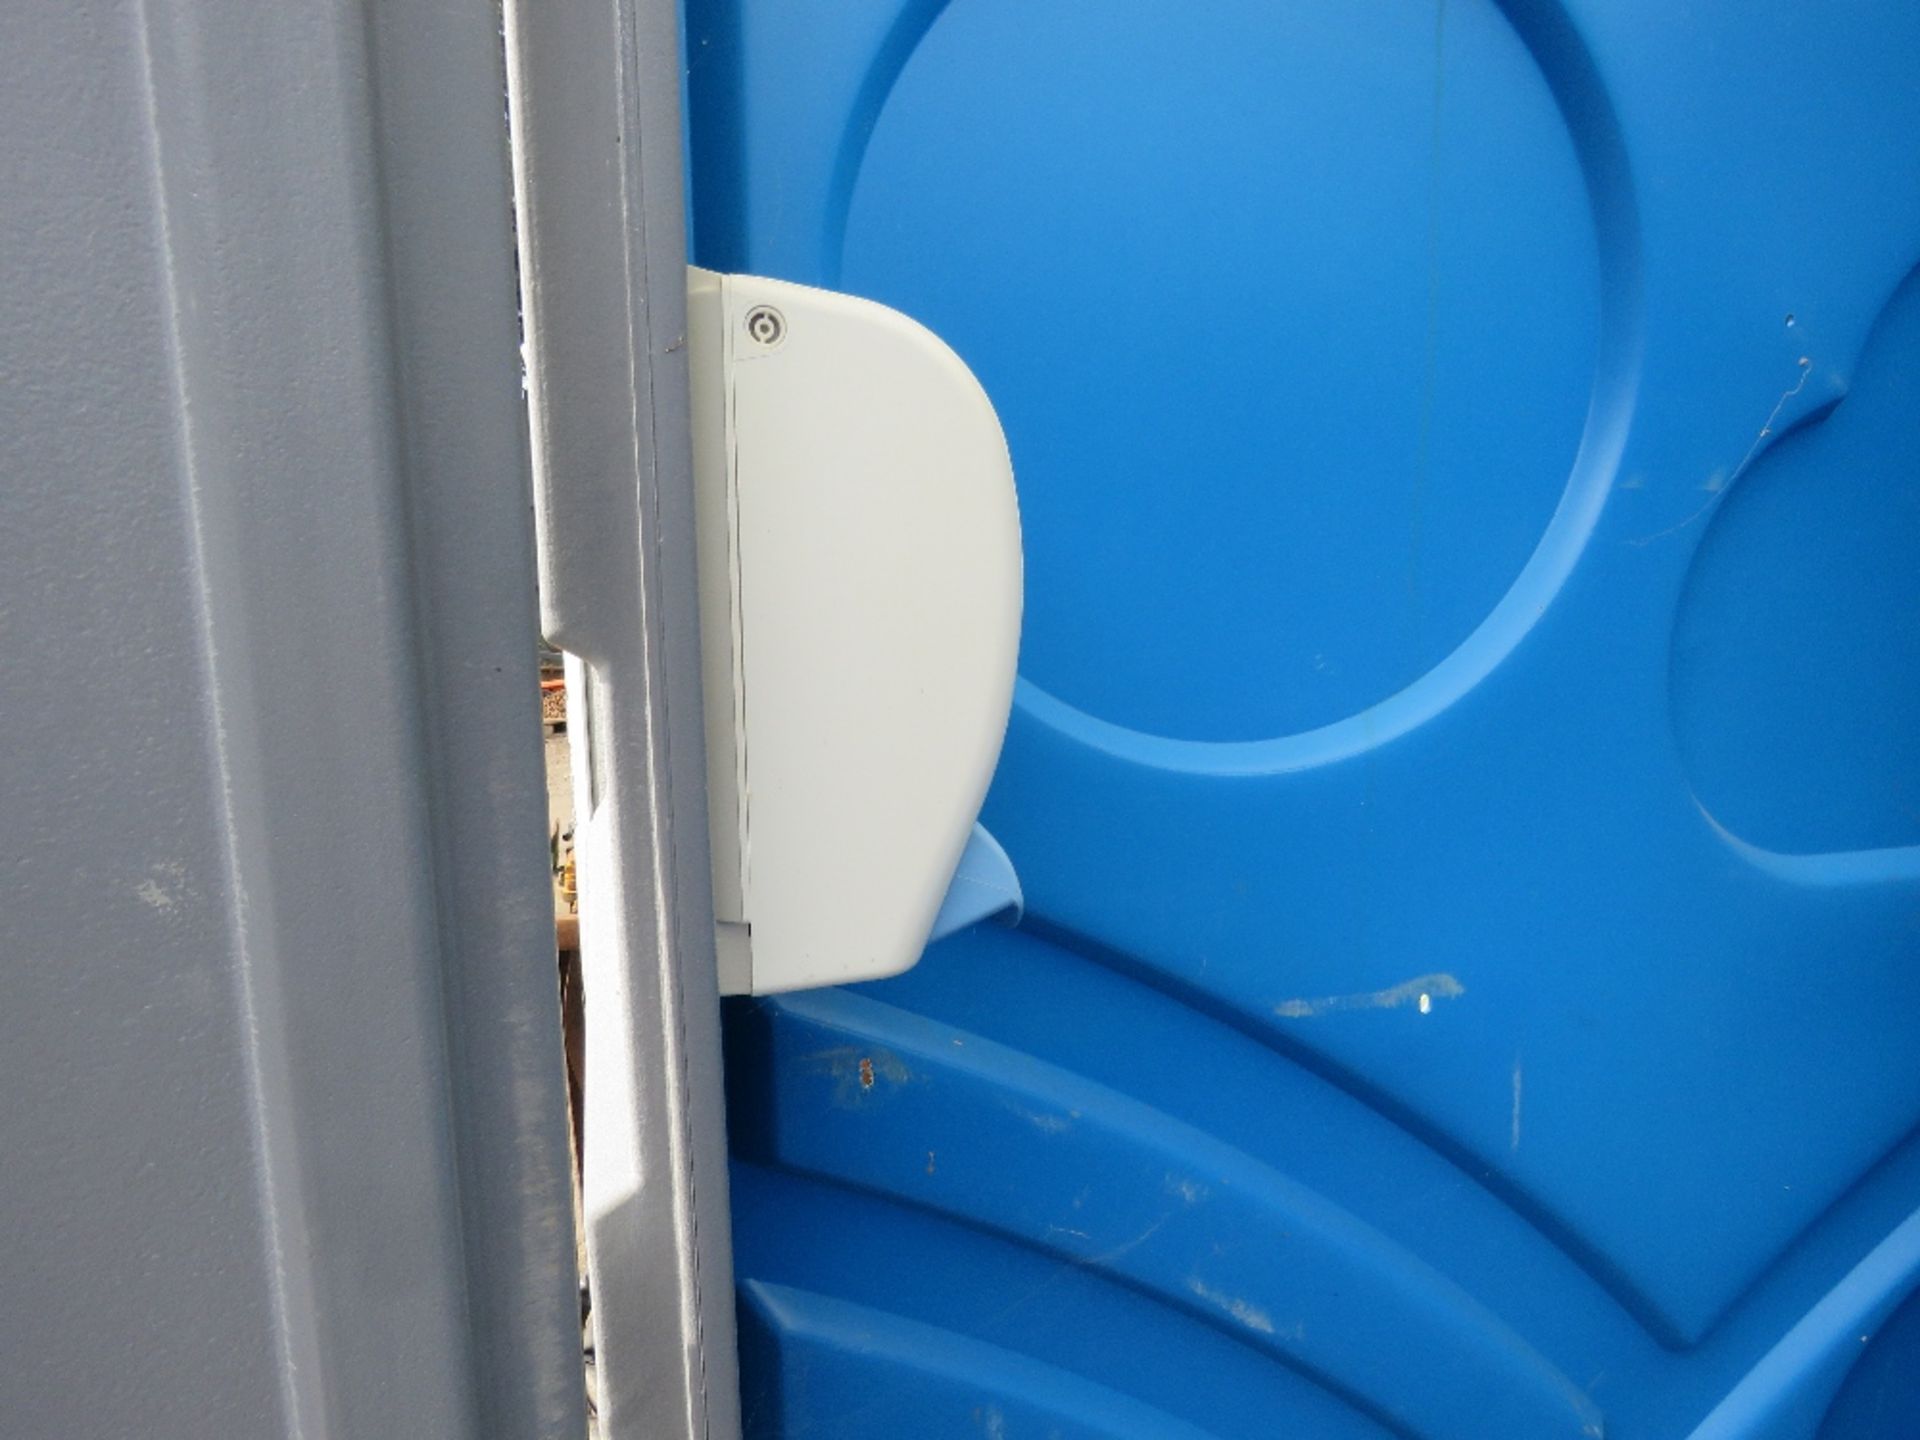 PORTABLE SITE TOILET - Image 3 of 4